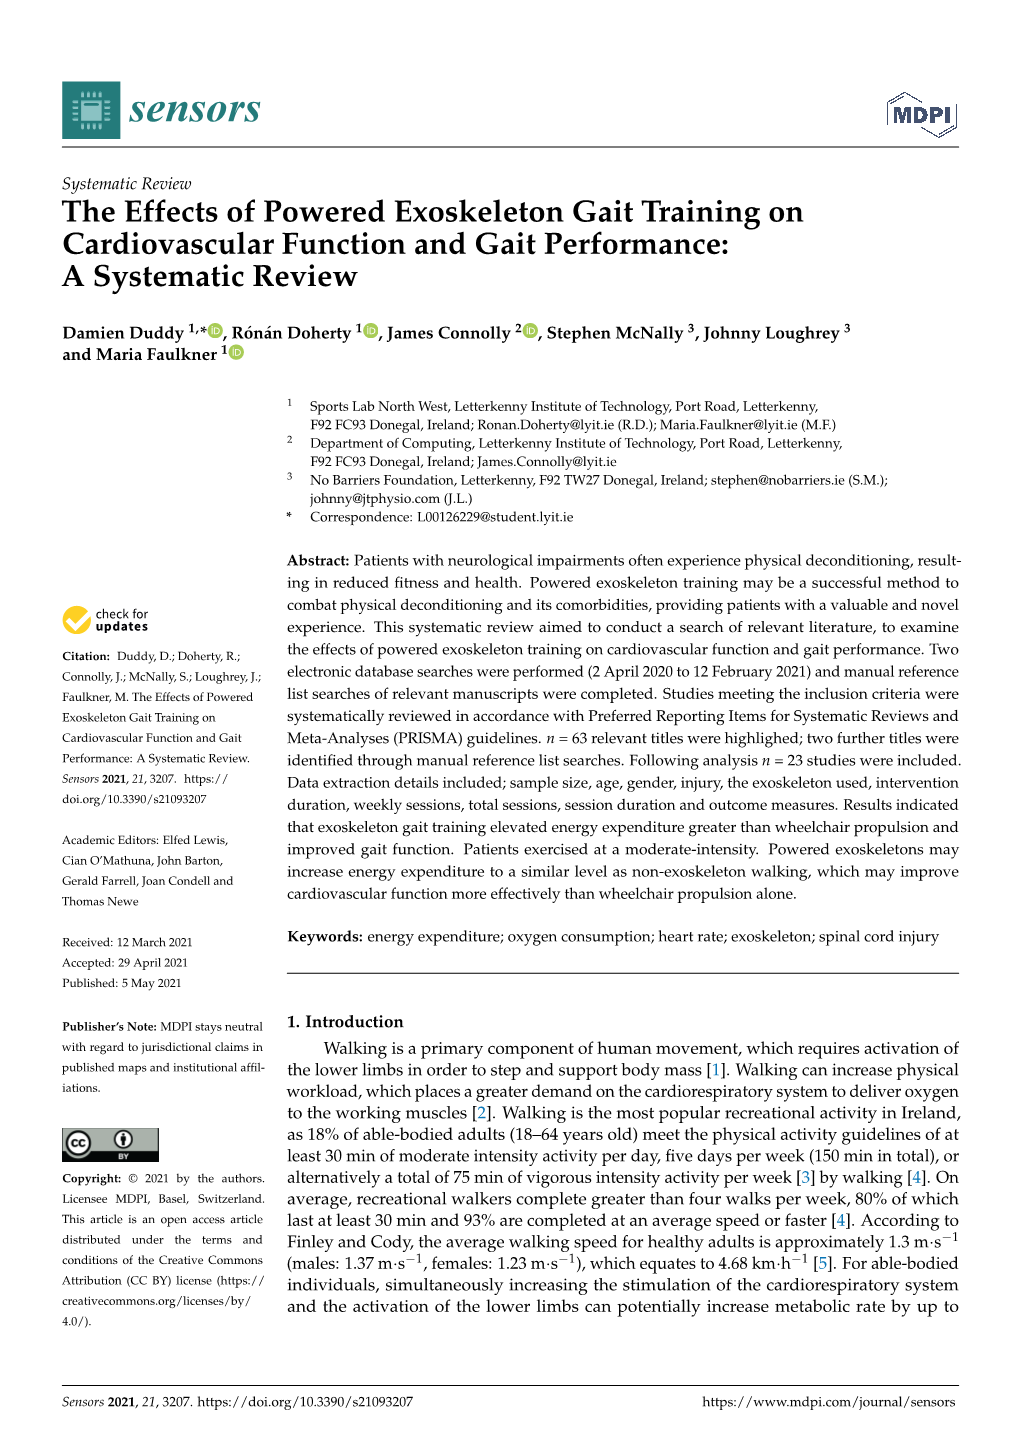 The Effects of Powered Exoskeleton Gait Training on Cardiovascular Function and Gait Performance: a Systematic Review